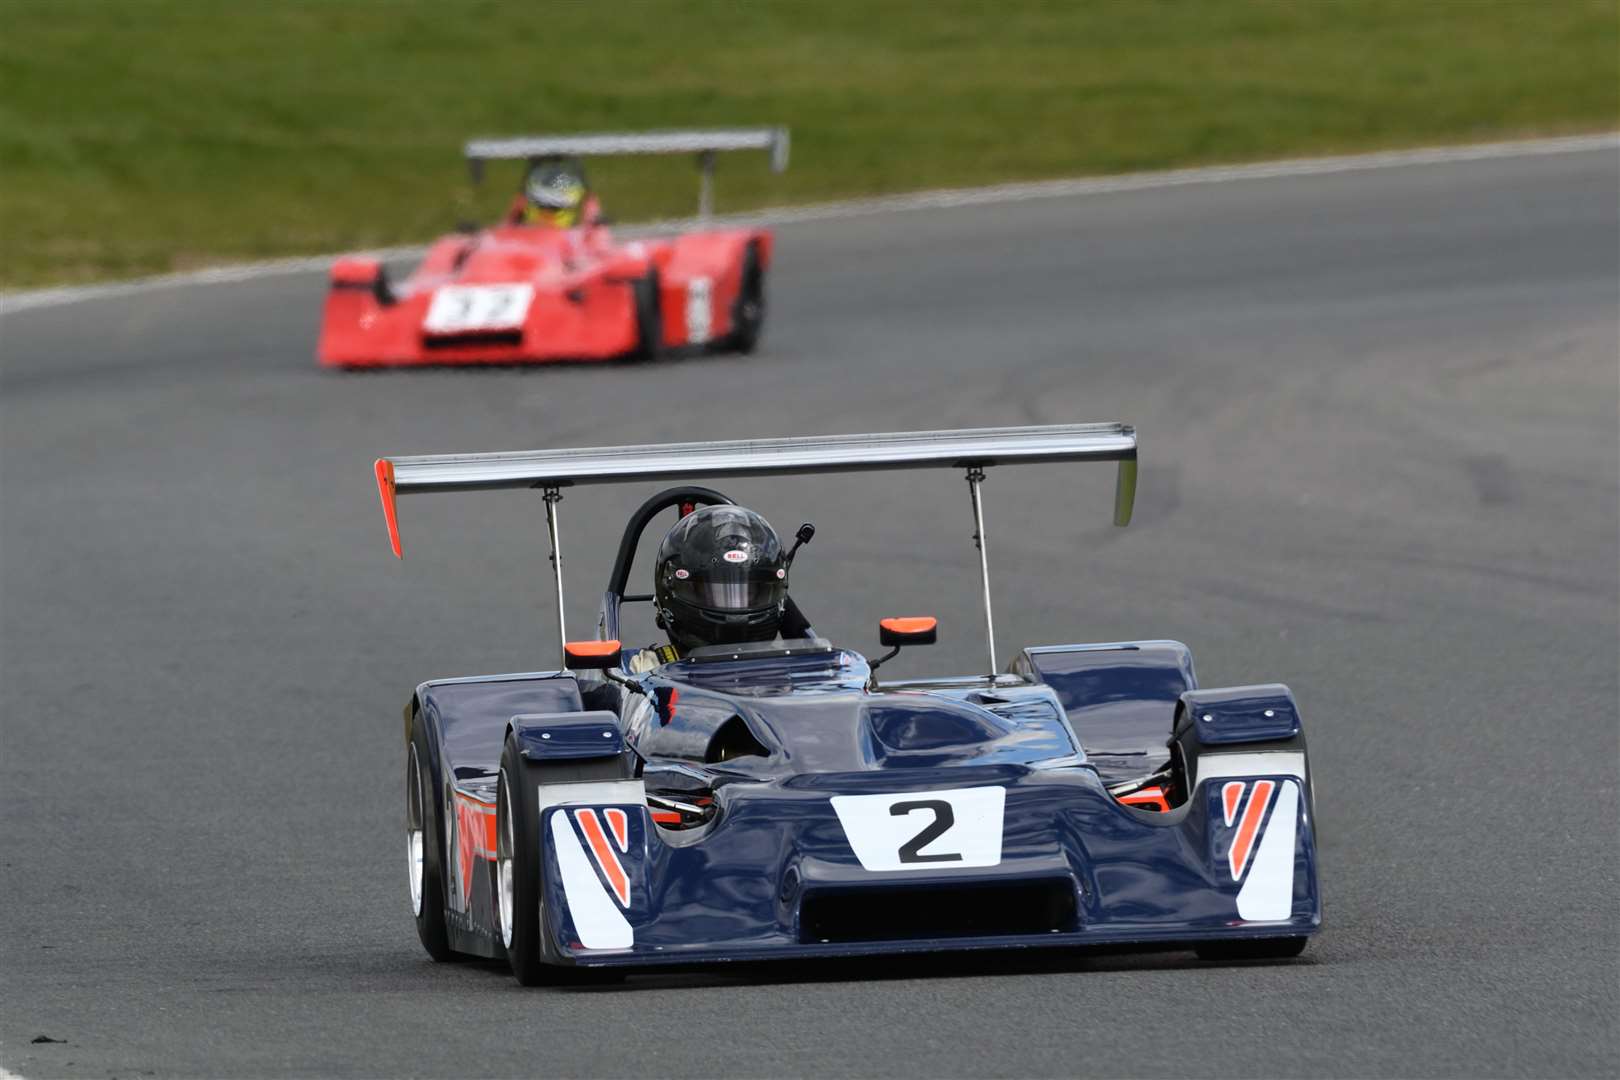 John Harrison, from Swanley Village, won both Classic Clubmans races in his 1980 Mallock Mk21